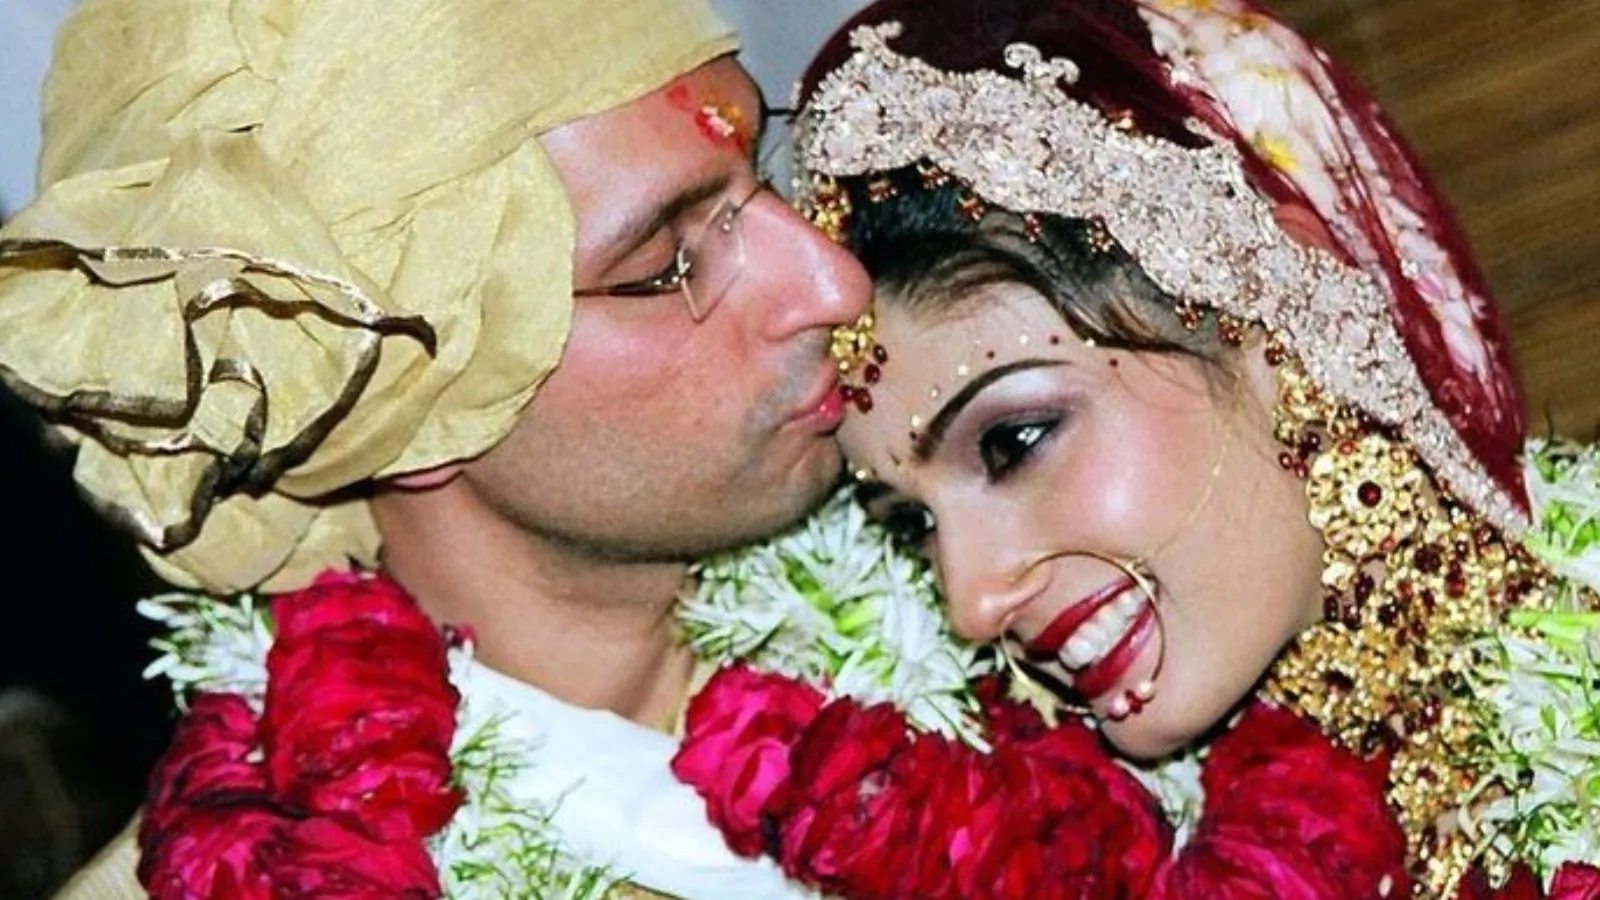 See Raveena Tandon as a Blushing Bride from Her Wedding with Anil Thadani 18 Years Ago